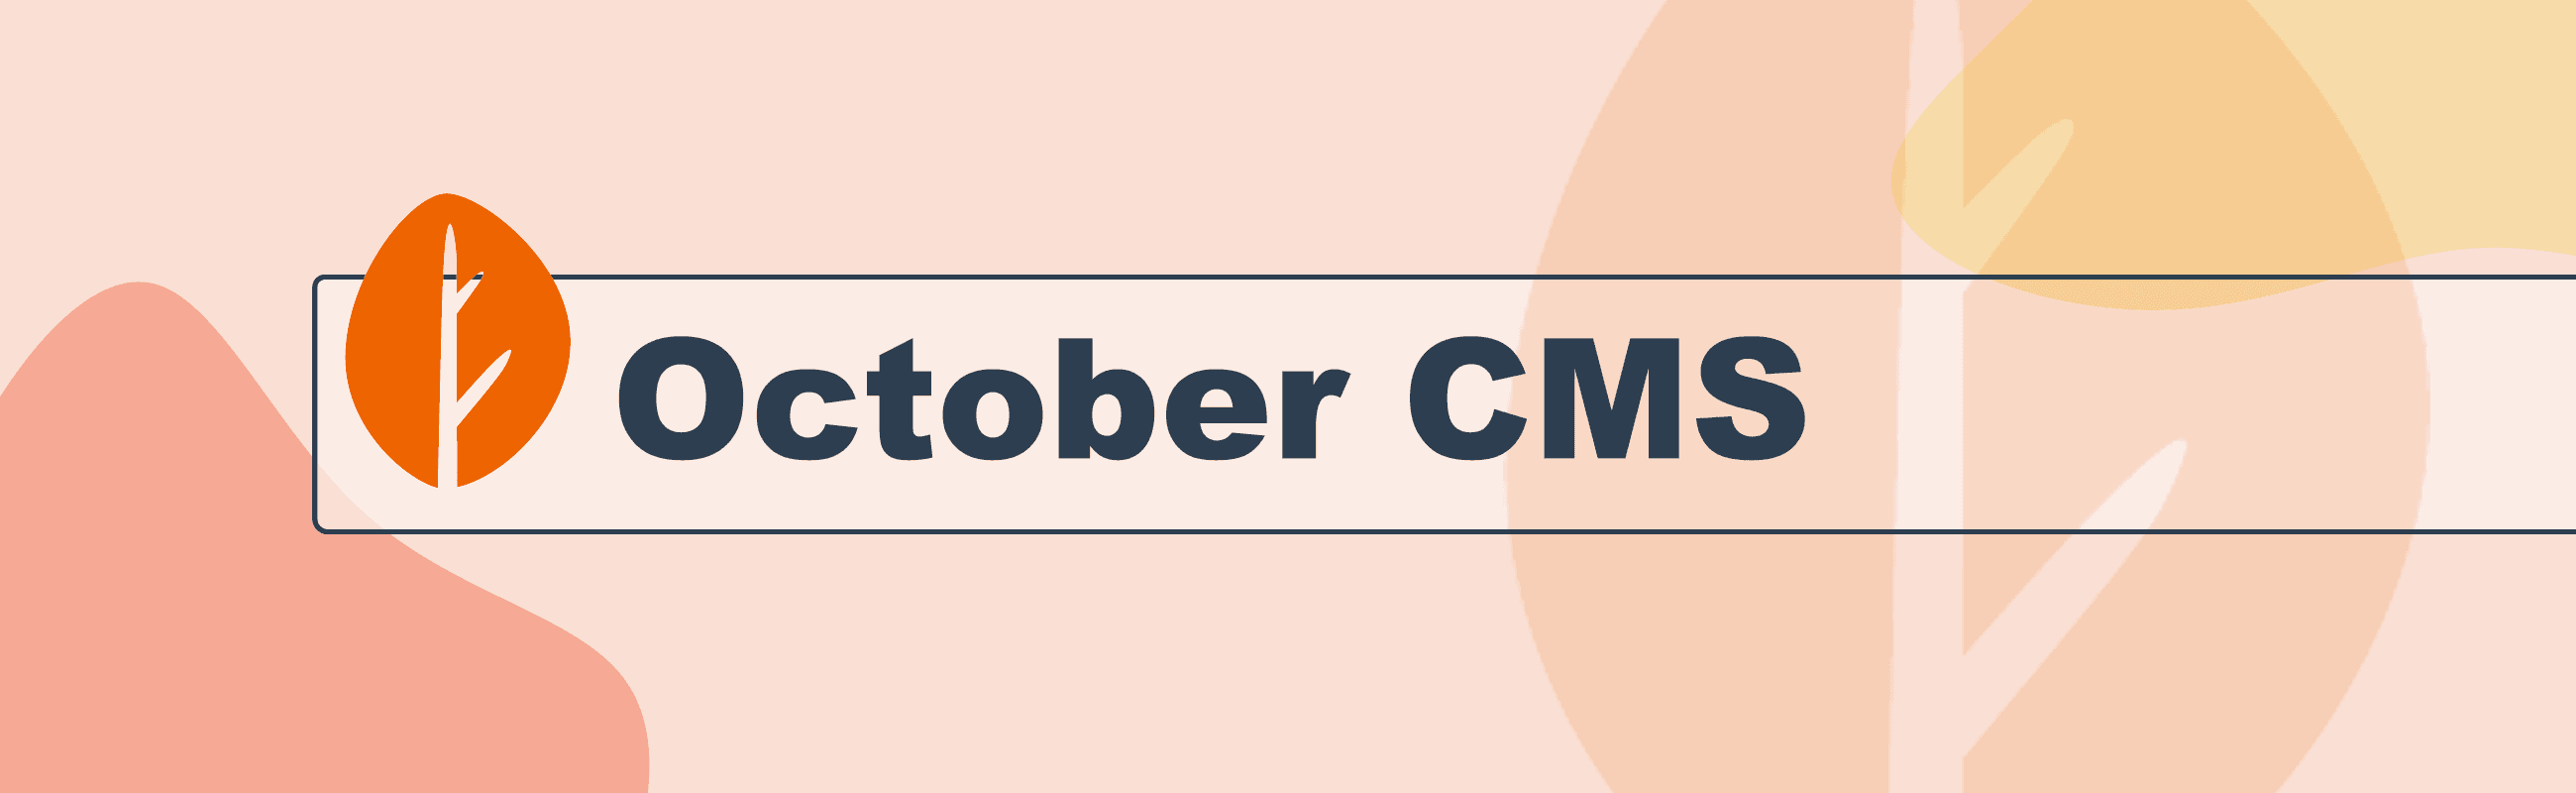 Illustration of the logo of the October CMS, along with the text "October CMS"